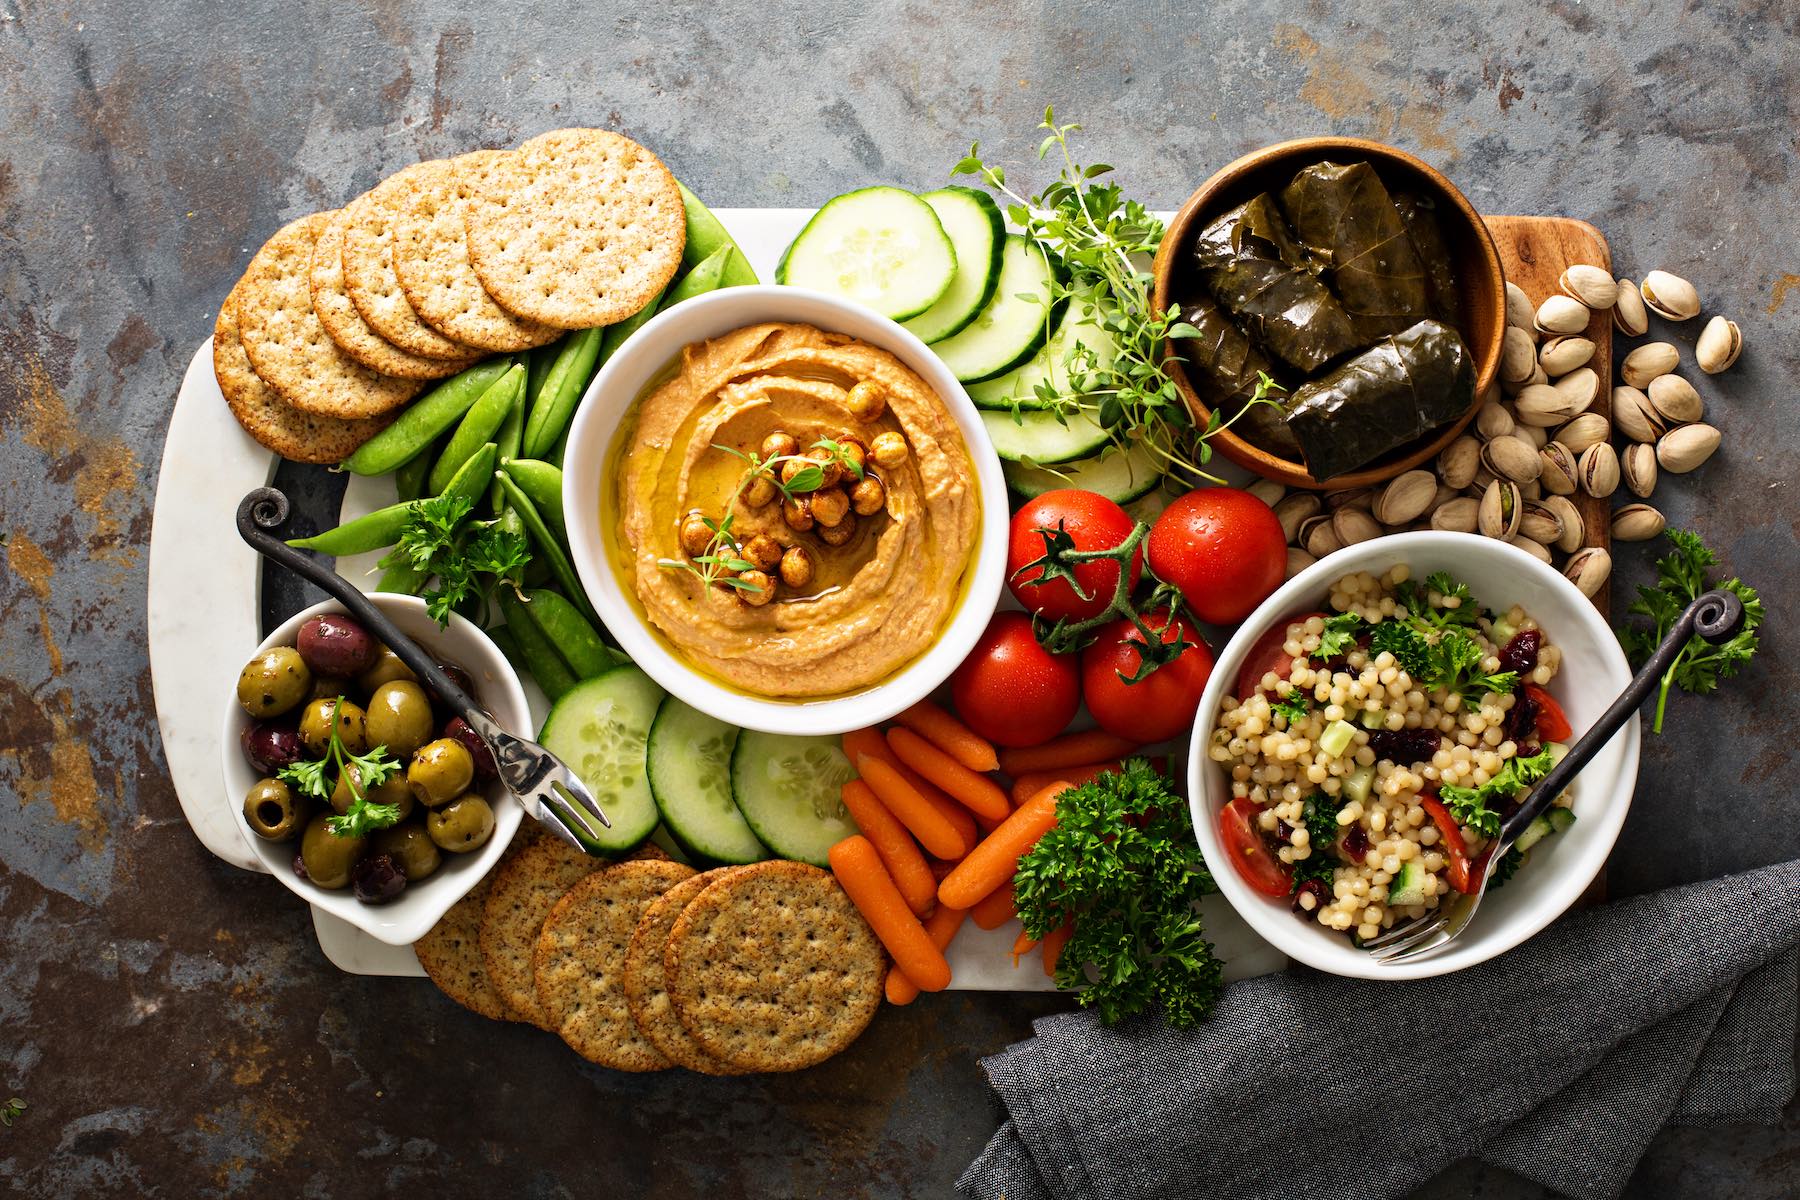 Hummus and fresh vegetables snack platter with grain salad and crackers